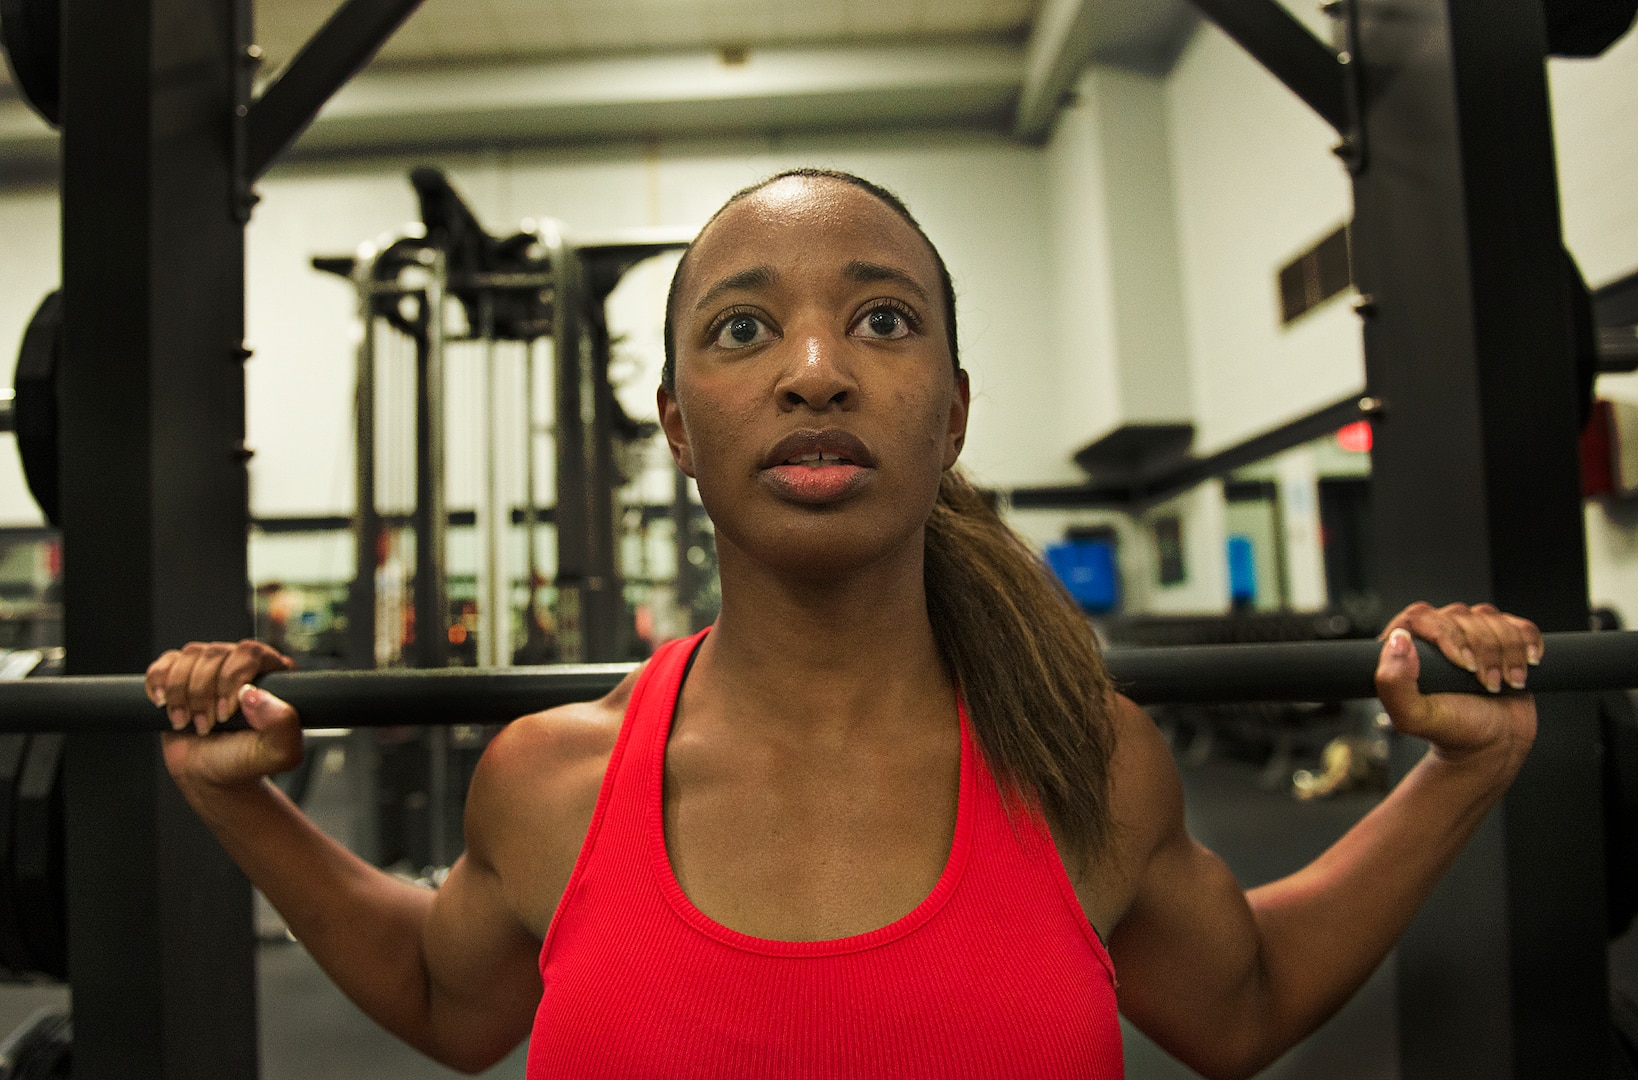 Staff Sgt. Miceala Simmons, 59th Medical Wing learning resource administrator, prepares for an upcoming fitness competition at Joint Base San Antonio-Lackland.(U.S. Air Force photo by Ben Faske/Released)
